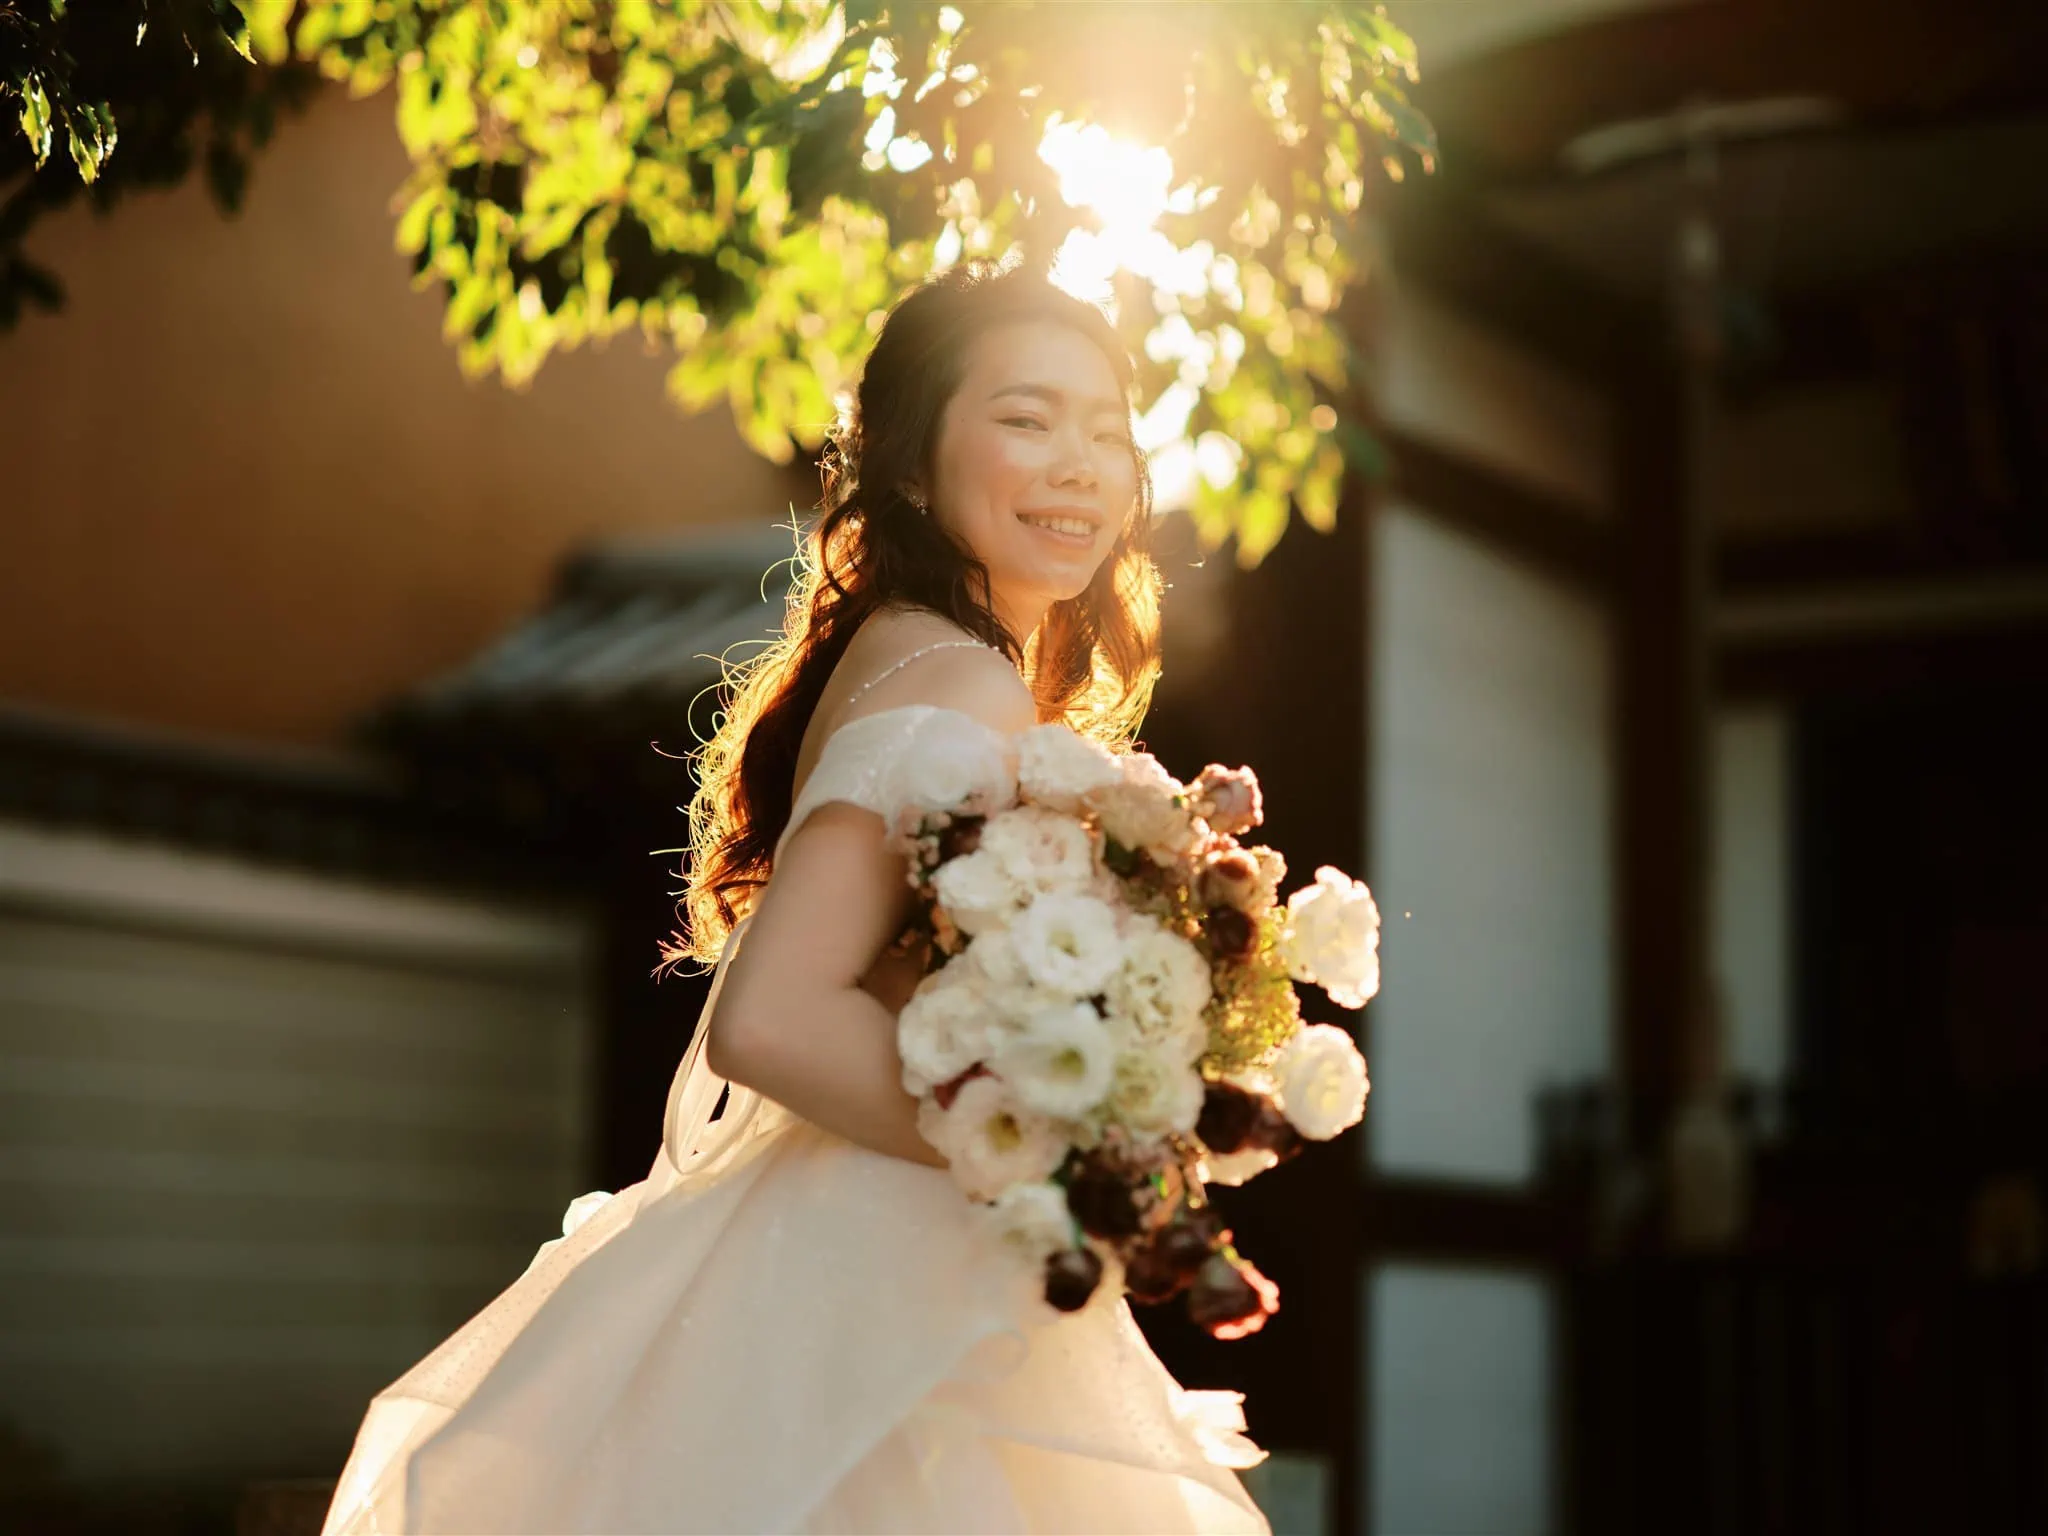 Kyoto Tokyo Japan Elopement Wedding Photographer, Planner & Videographer | A bride in a wedding dress, captured by a Japan elopement photographer, elegantly poses with a bouquet in front of a mesmerizing house.